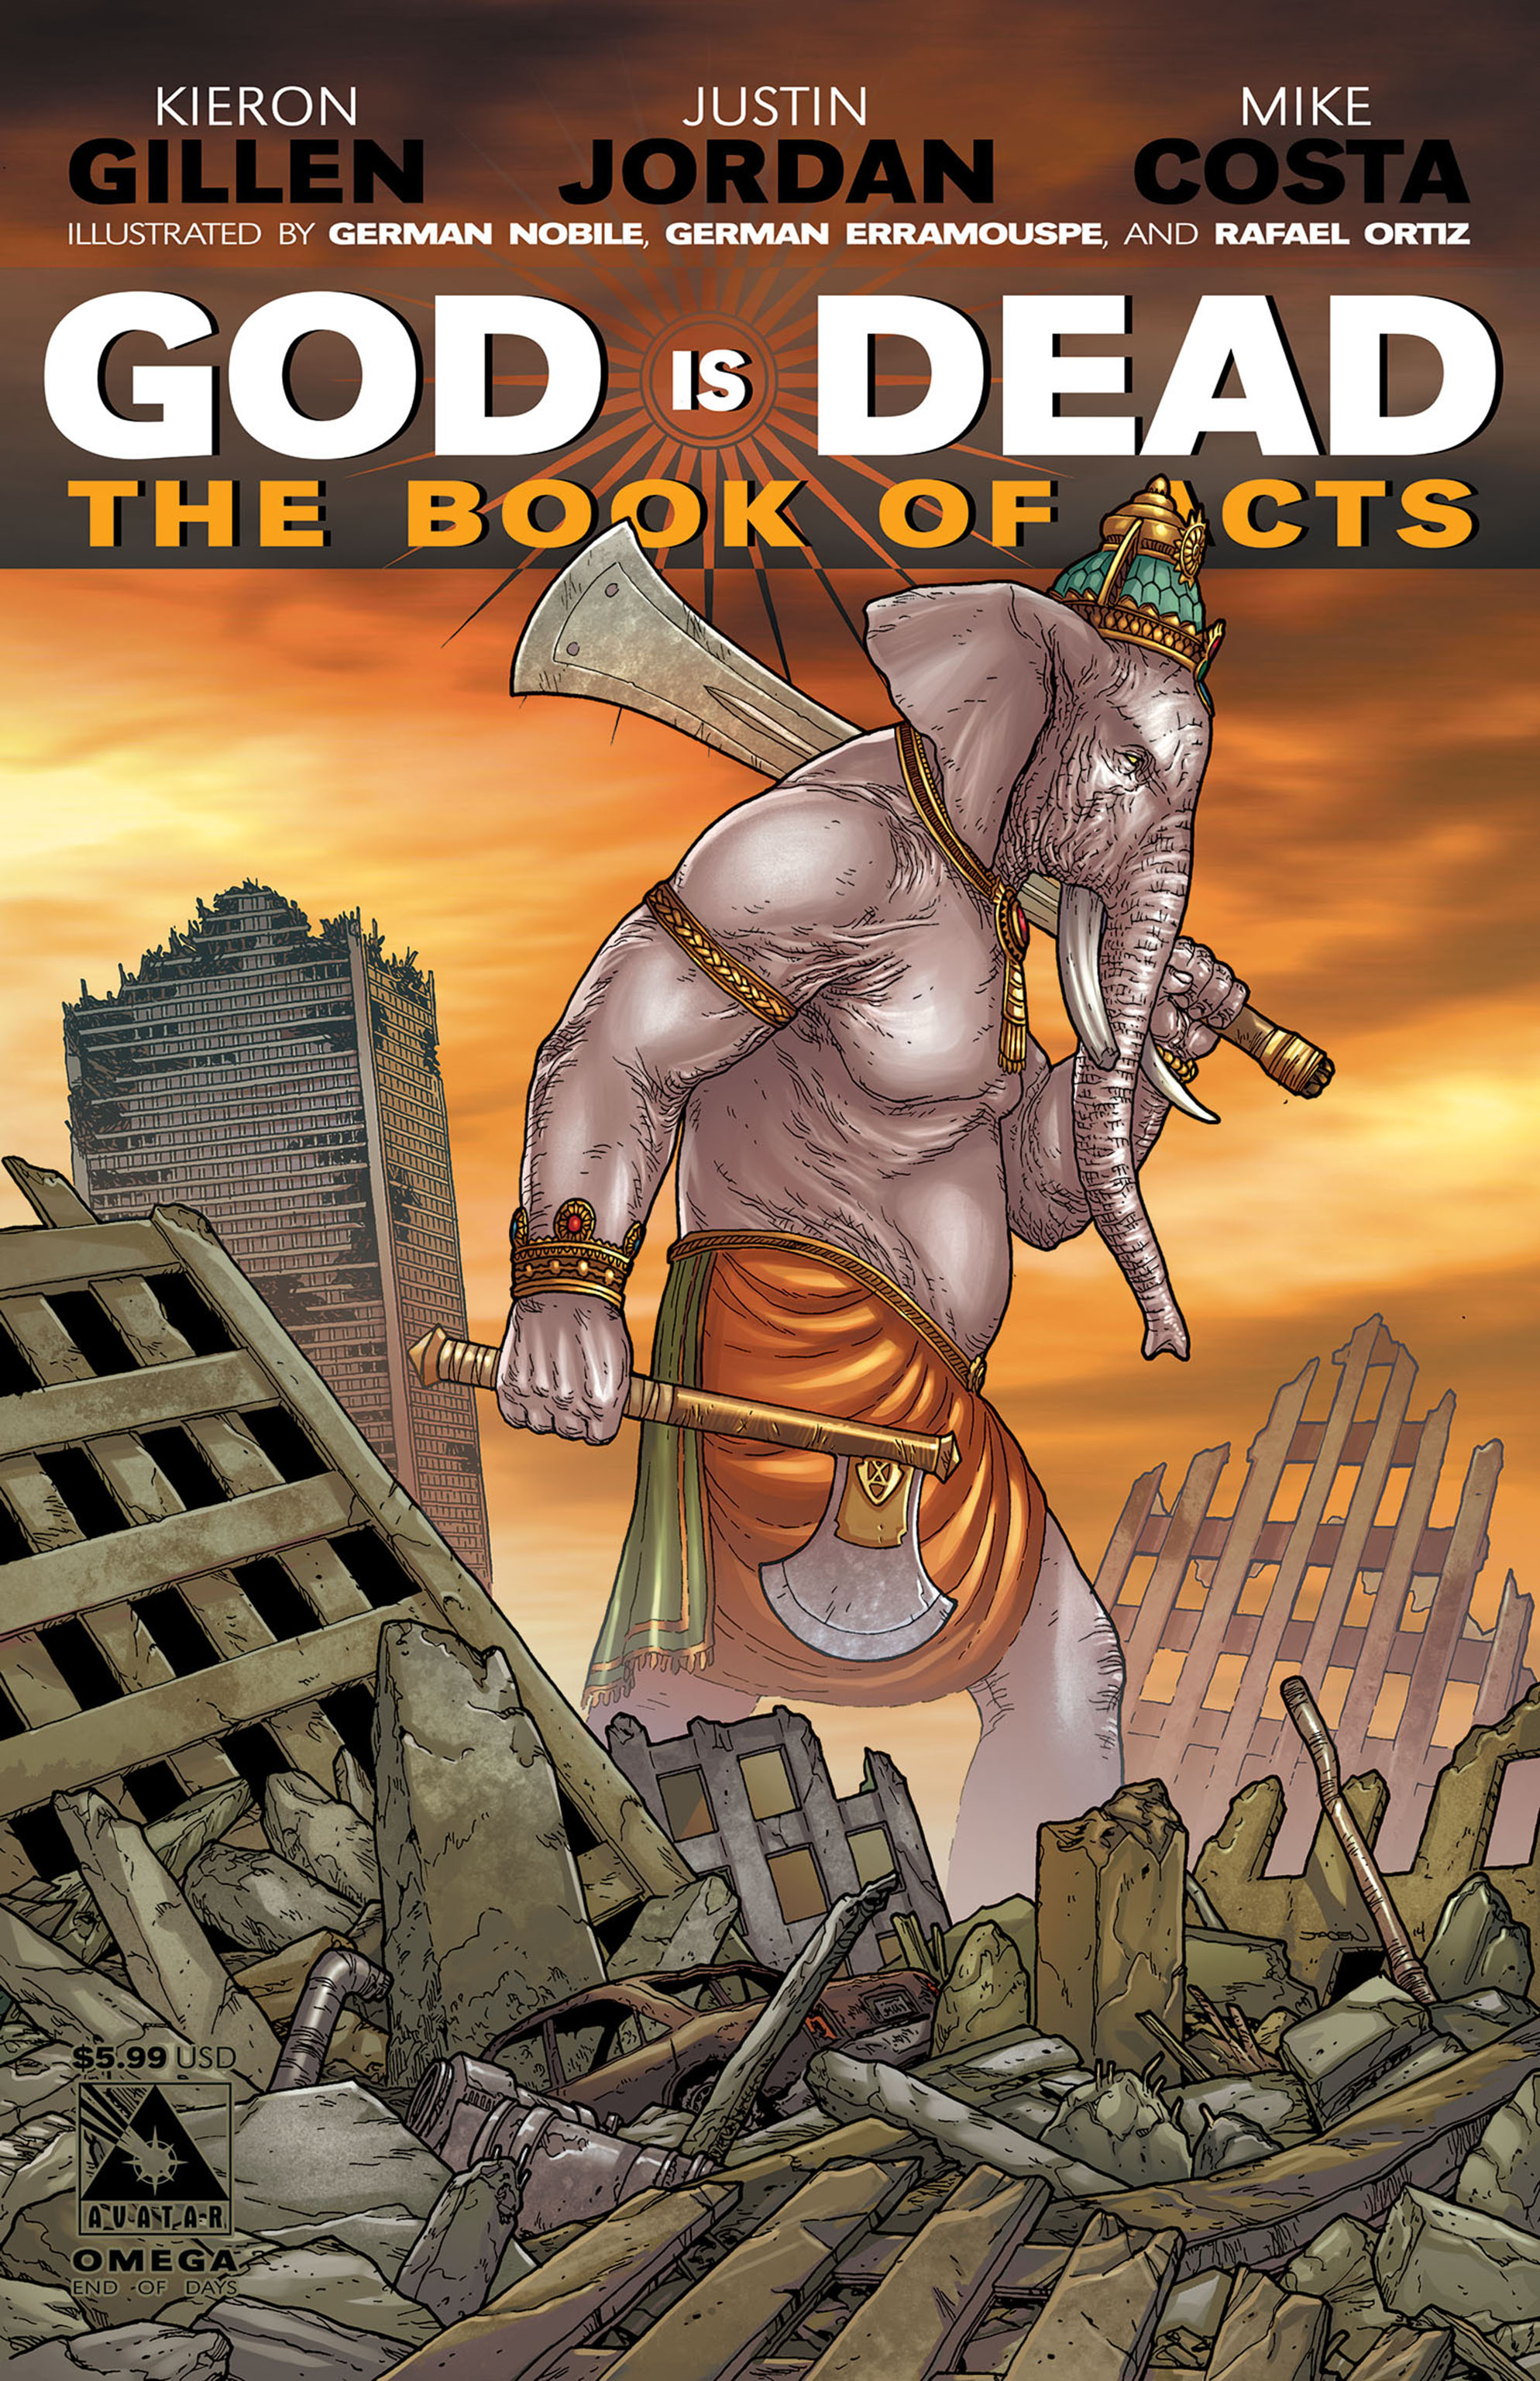 Read online God is Dead: Book of Acts comic -  Issue # Omega - 3